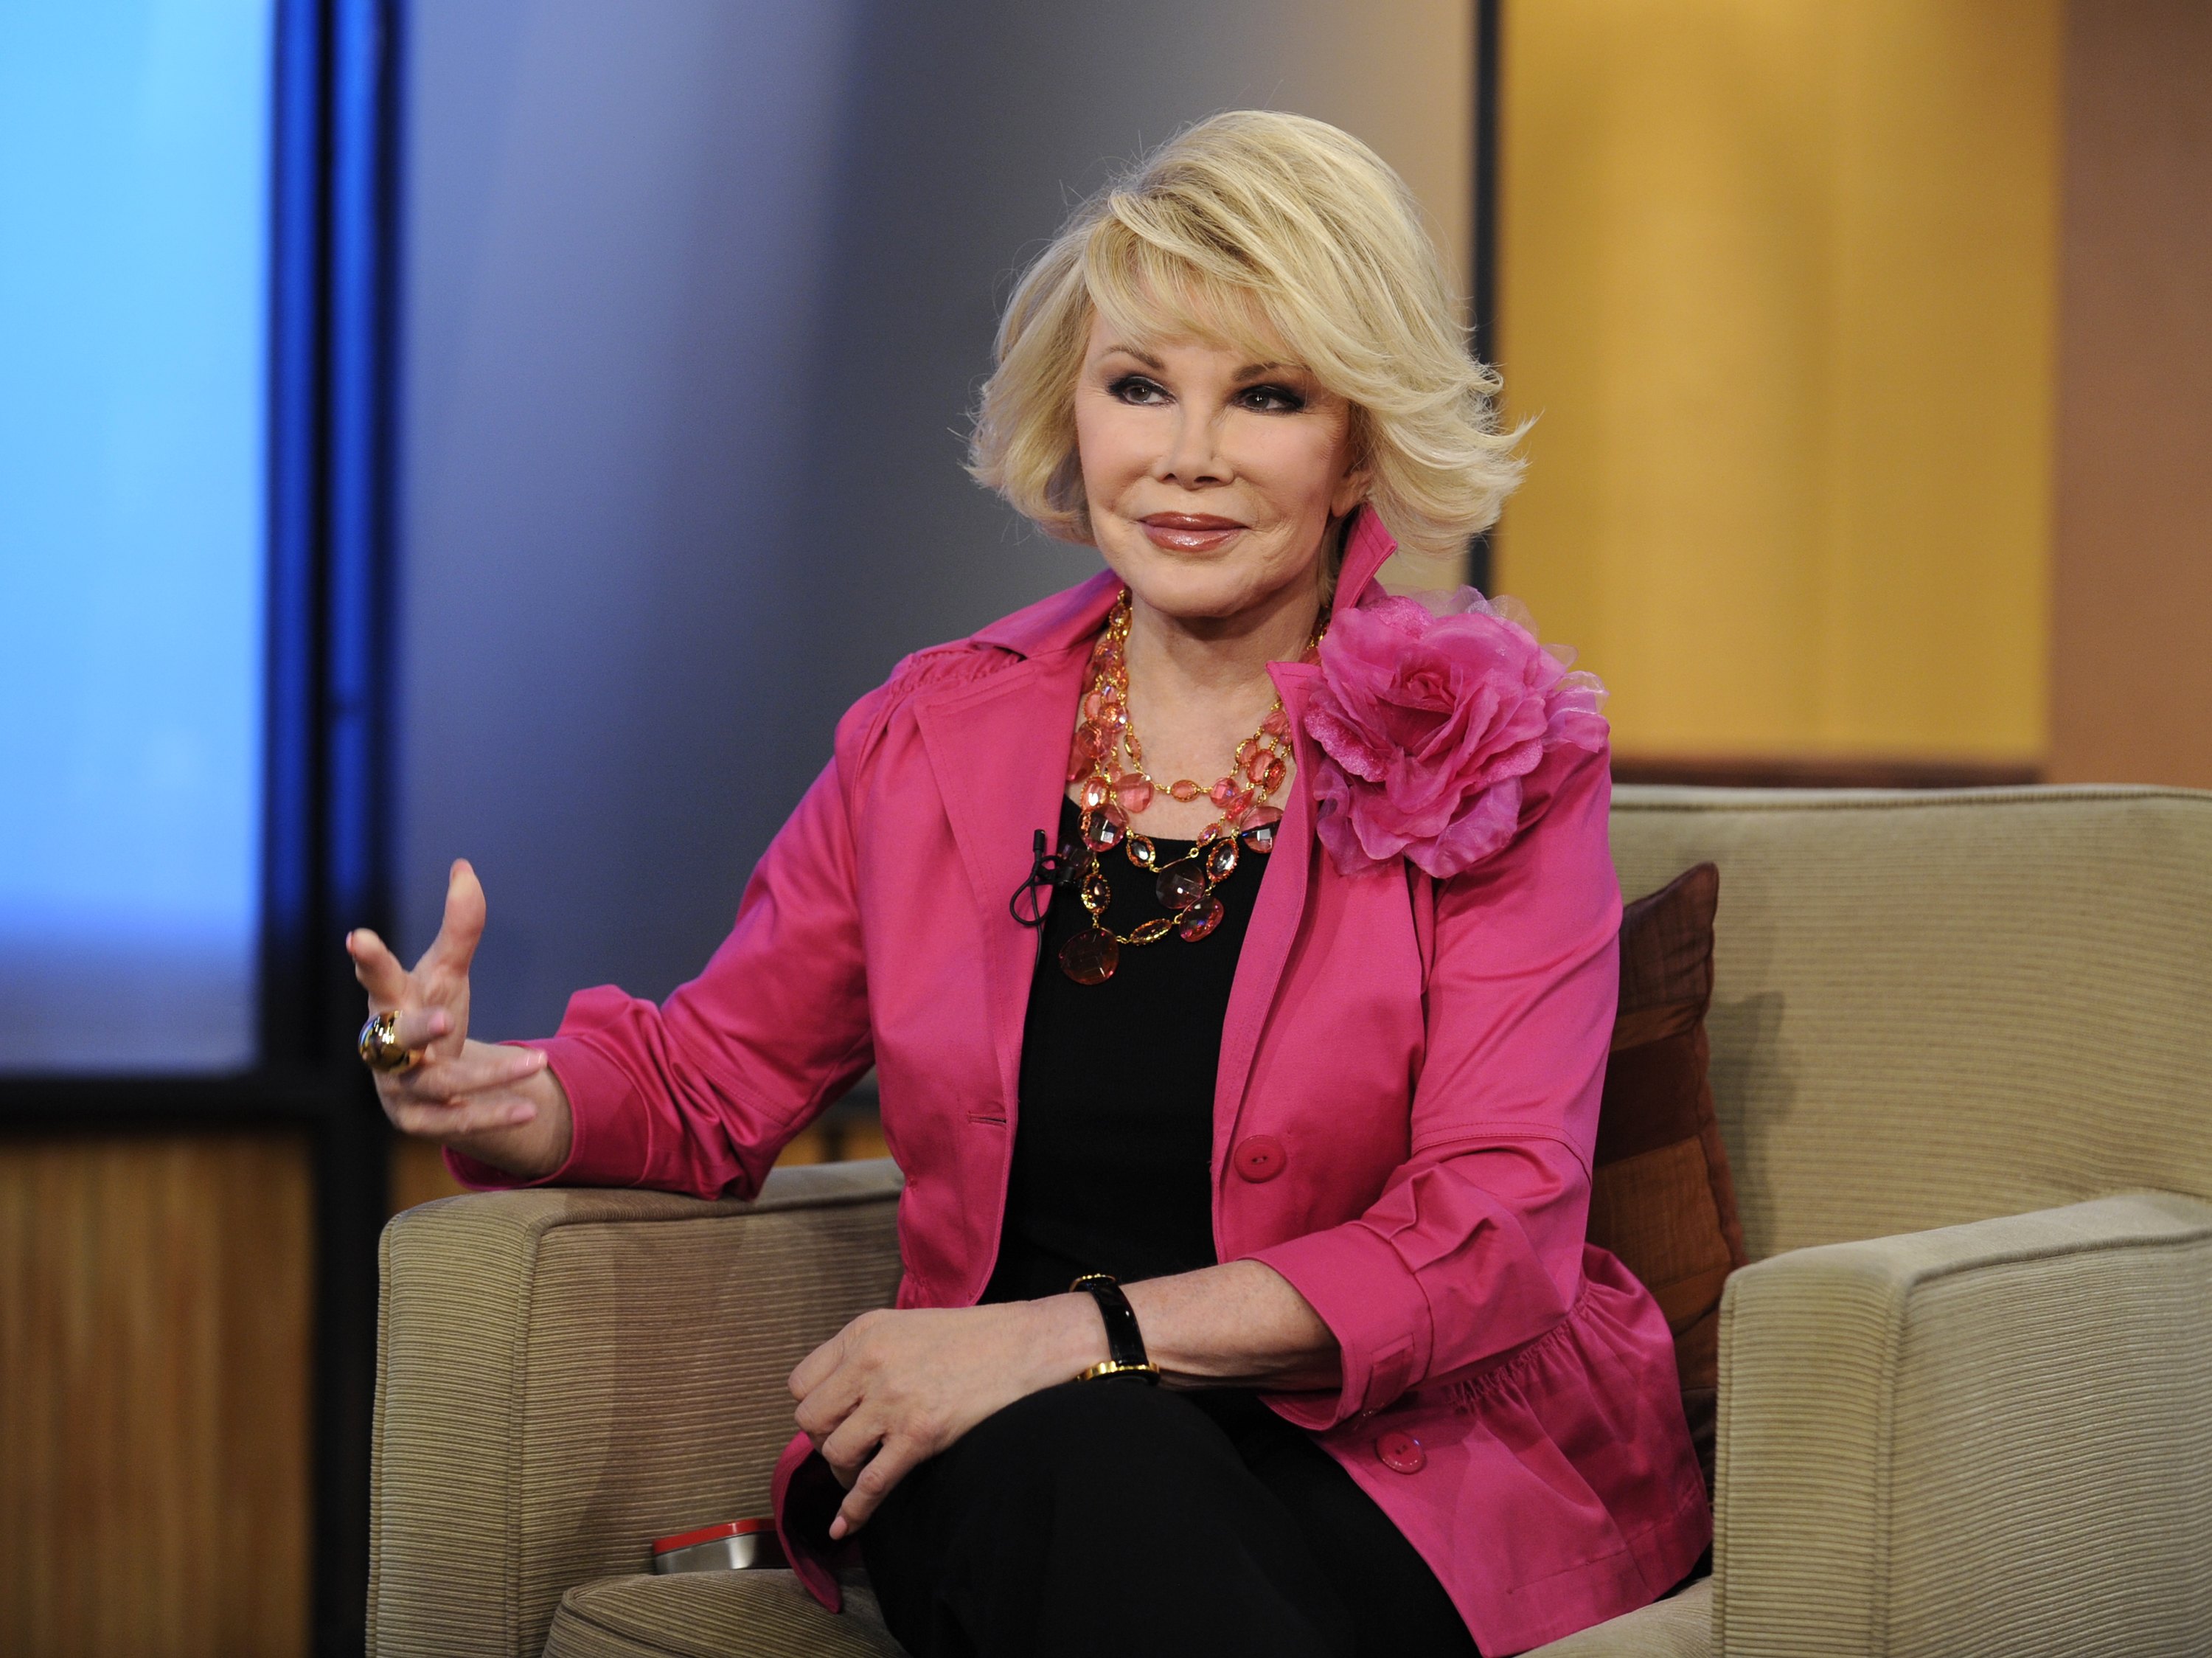 Joan Rivers talks about her documentary, "A Piece of Work,"  on "Good Morning America." (Steve Fenn&mdash;ABC / Getty Images)